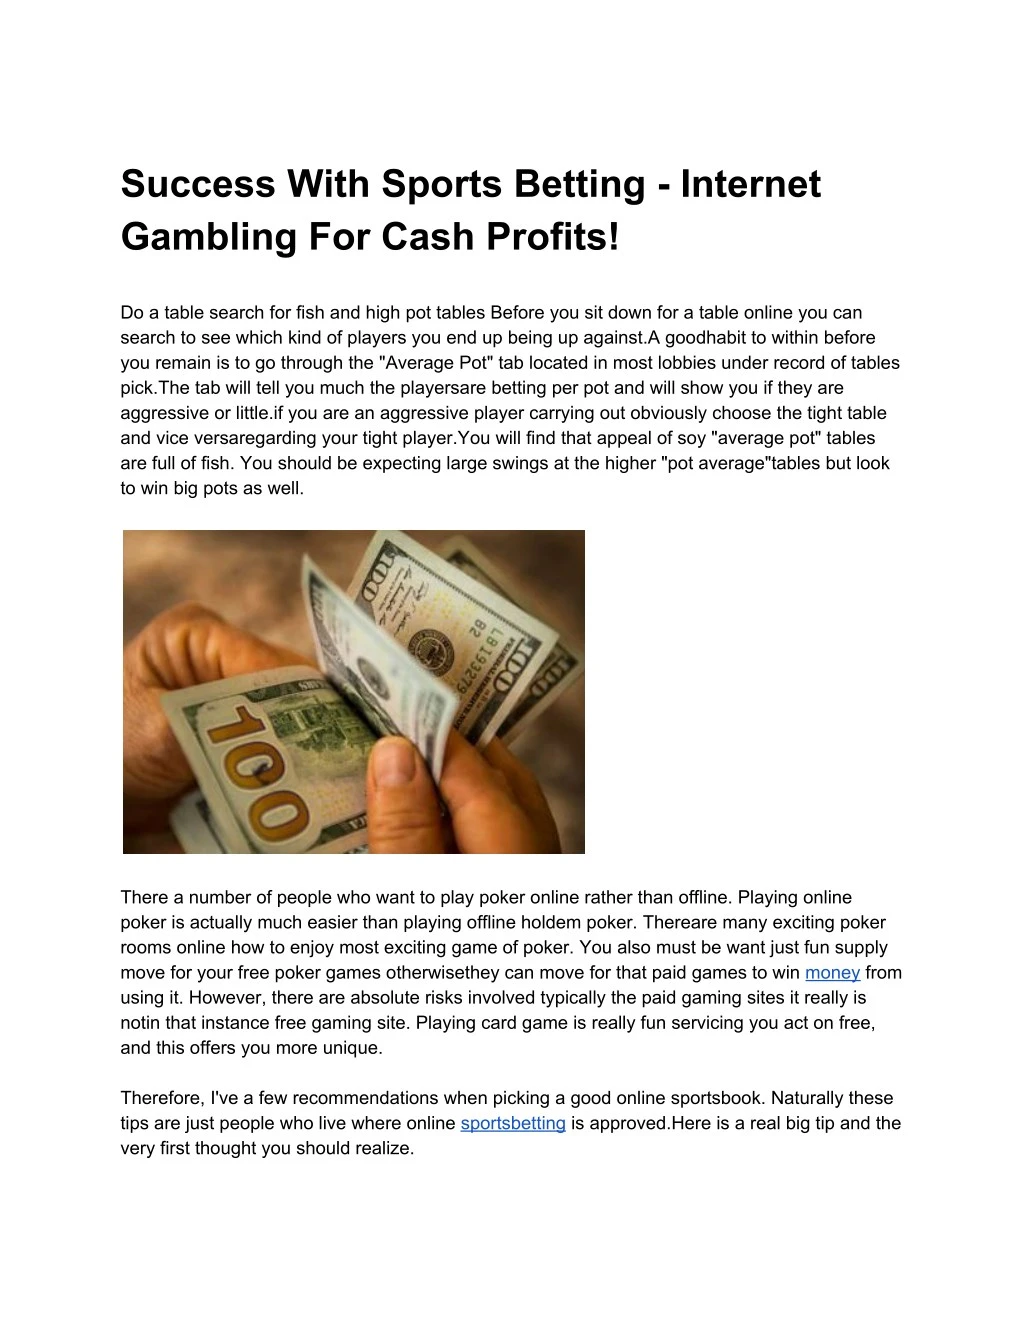 success with sports betting internet gambling